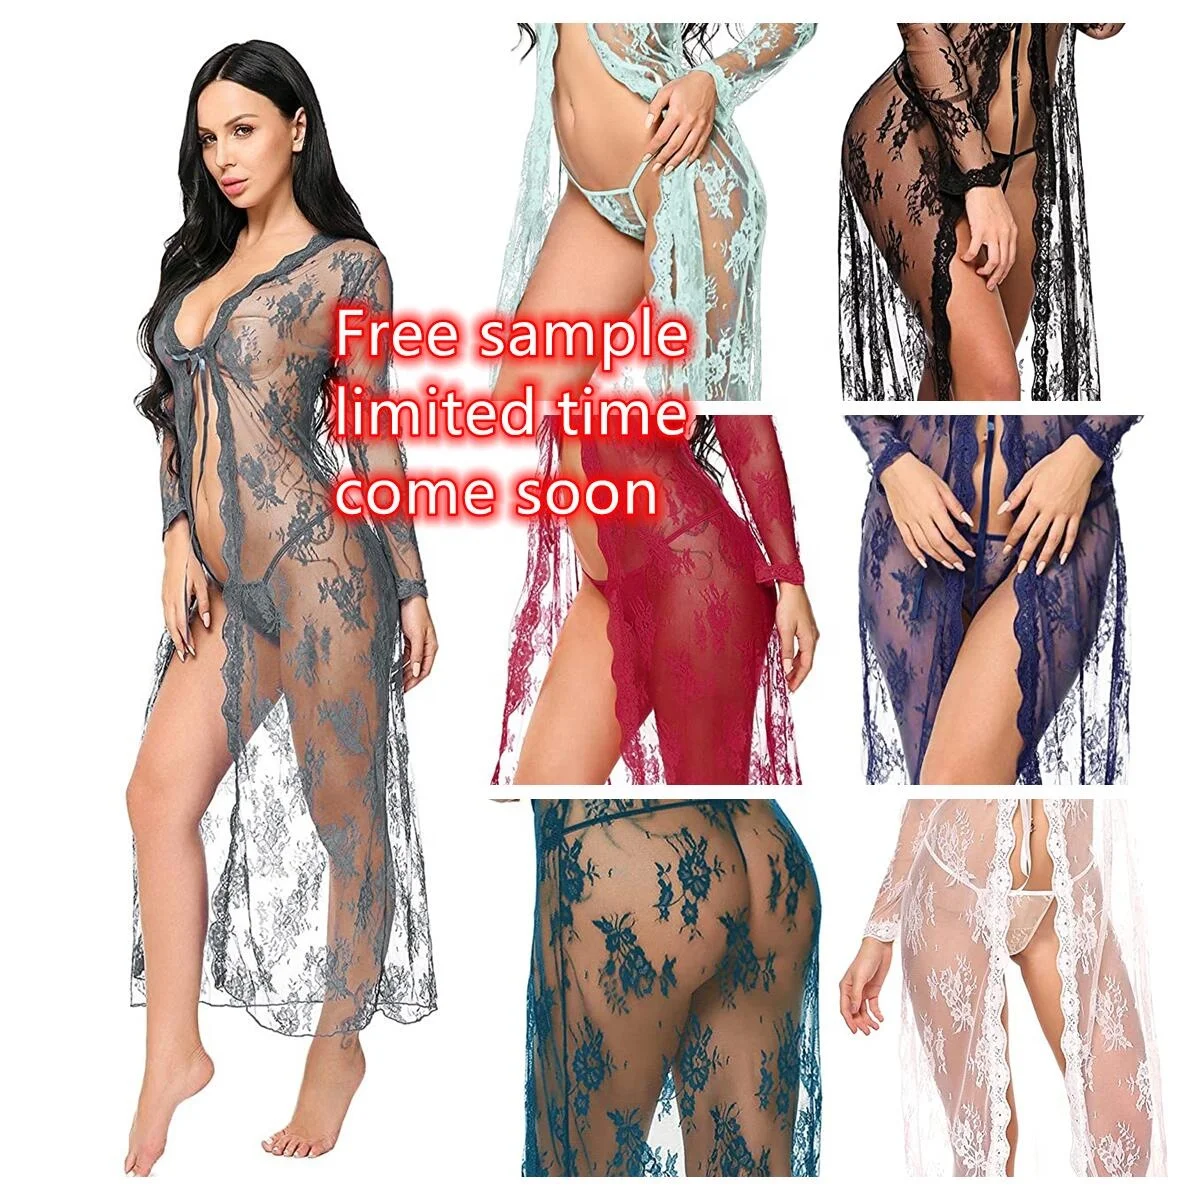 

Amazon Top Seller Lingerie Women Sexy Lingeries Long Lace Dress Sheer Gown See Through Kimono Robe Lenceria, Picture shown sexy sleepwear